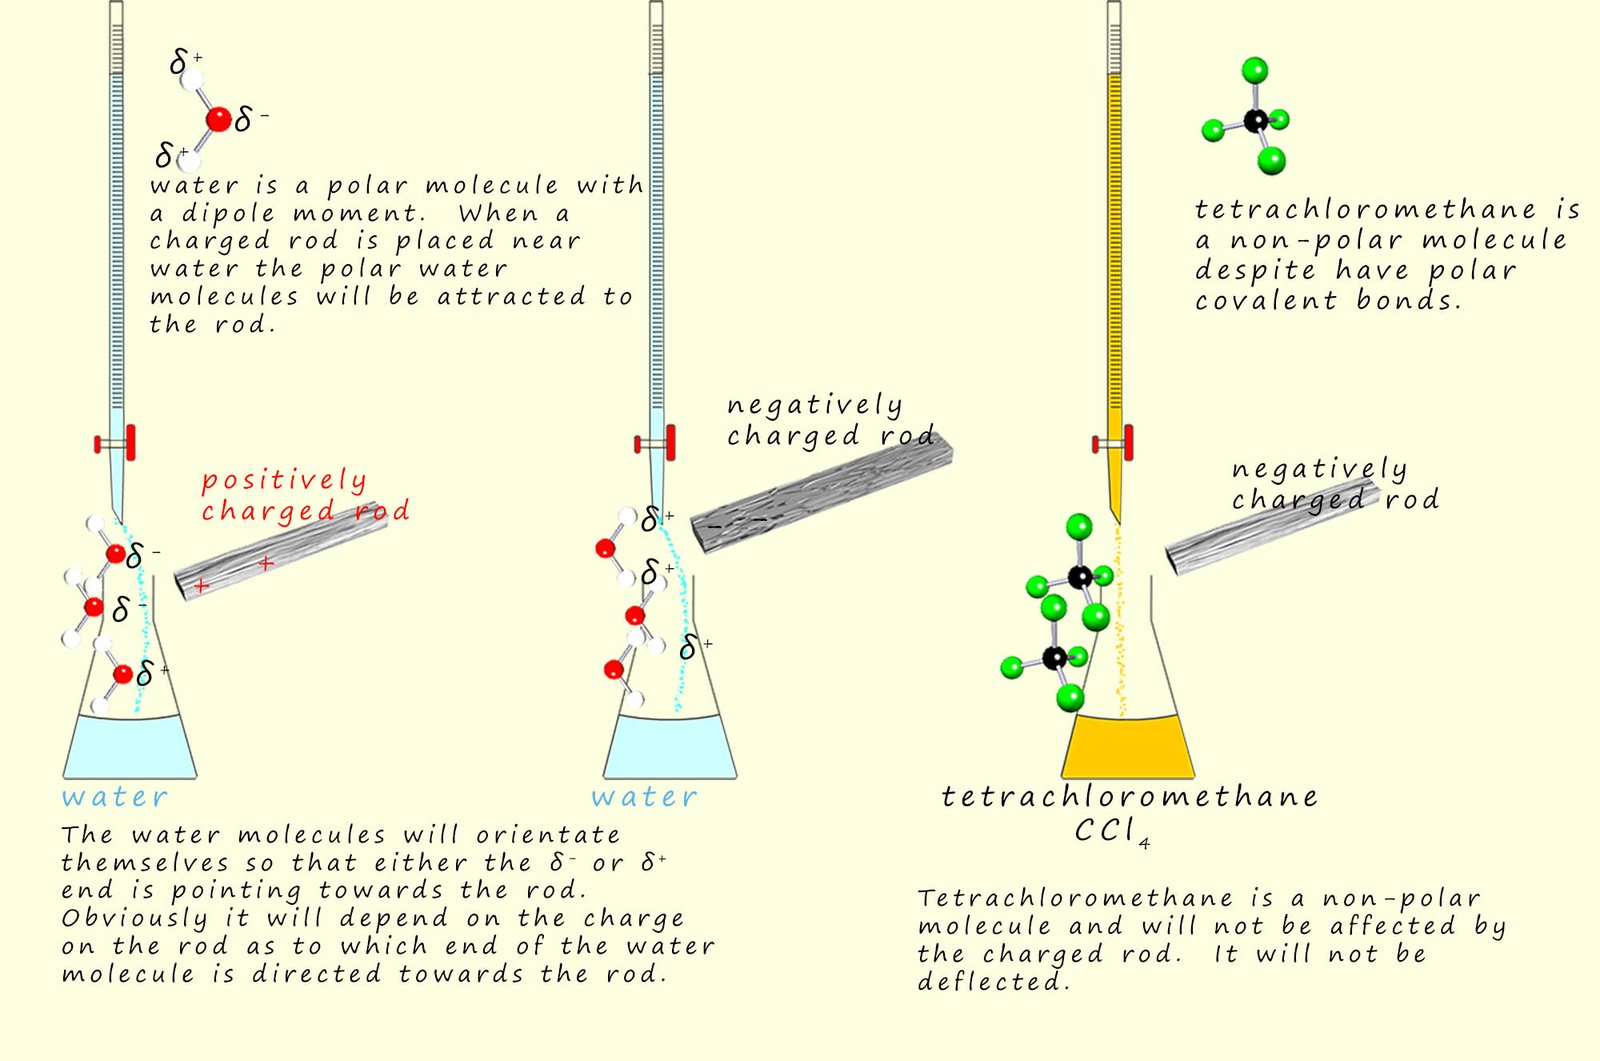 Deflection of polar molecules in a liquid by a charged rod